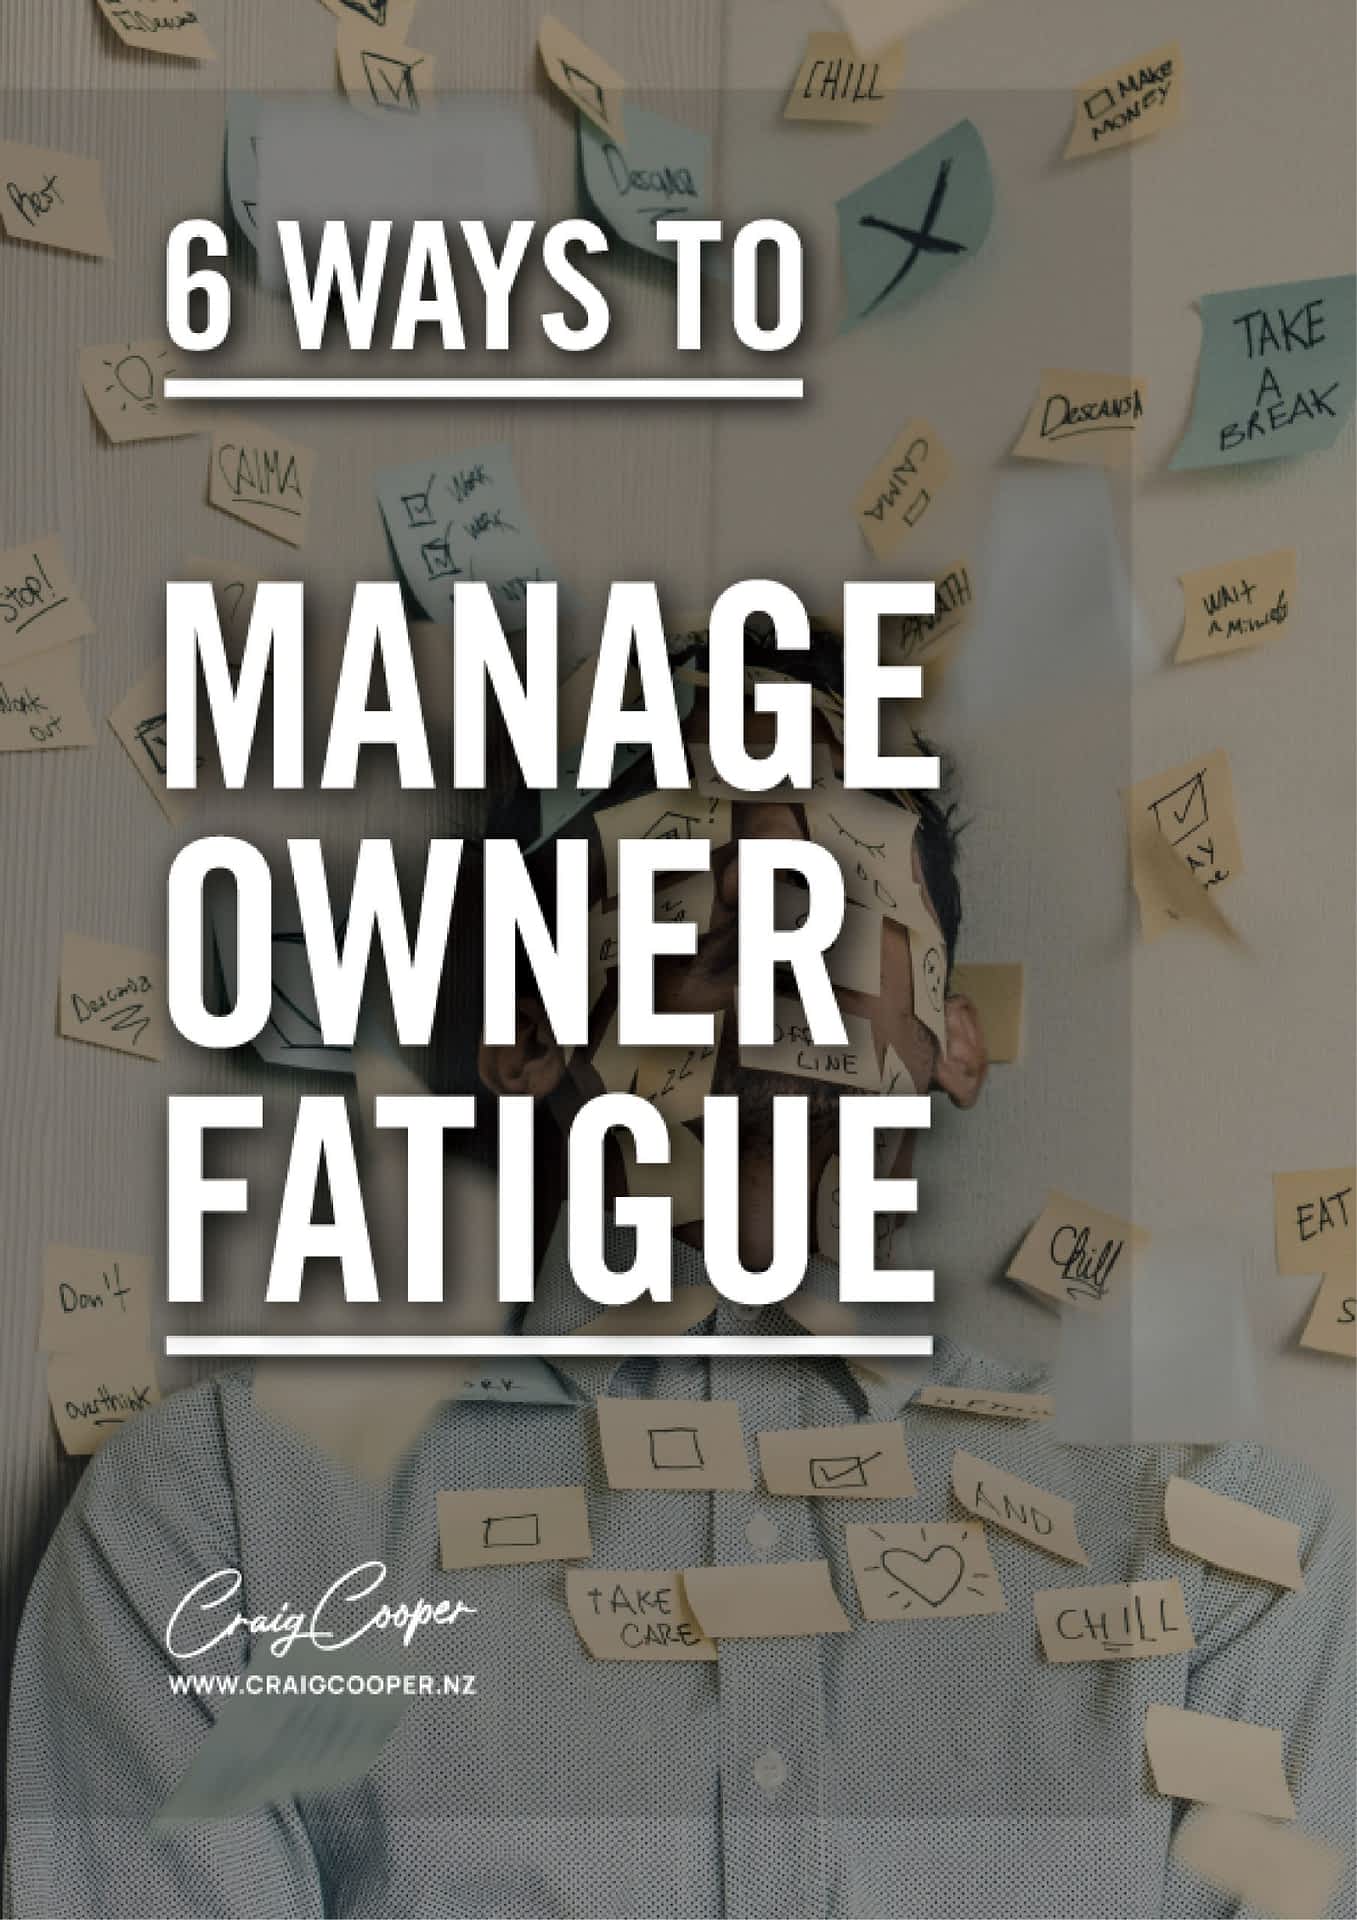 Business Resources 6 SIMPLE Ways to Manage Owner Fatigue